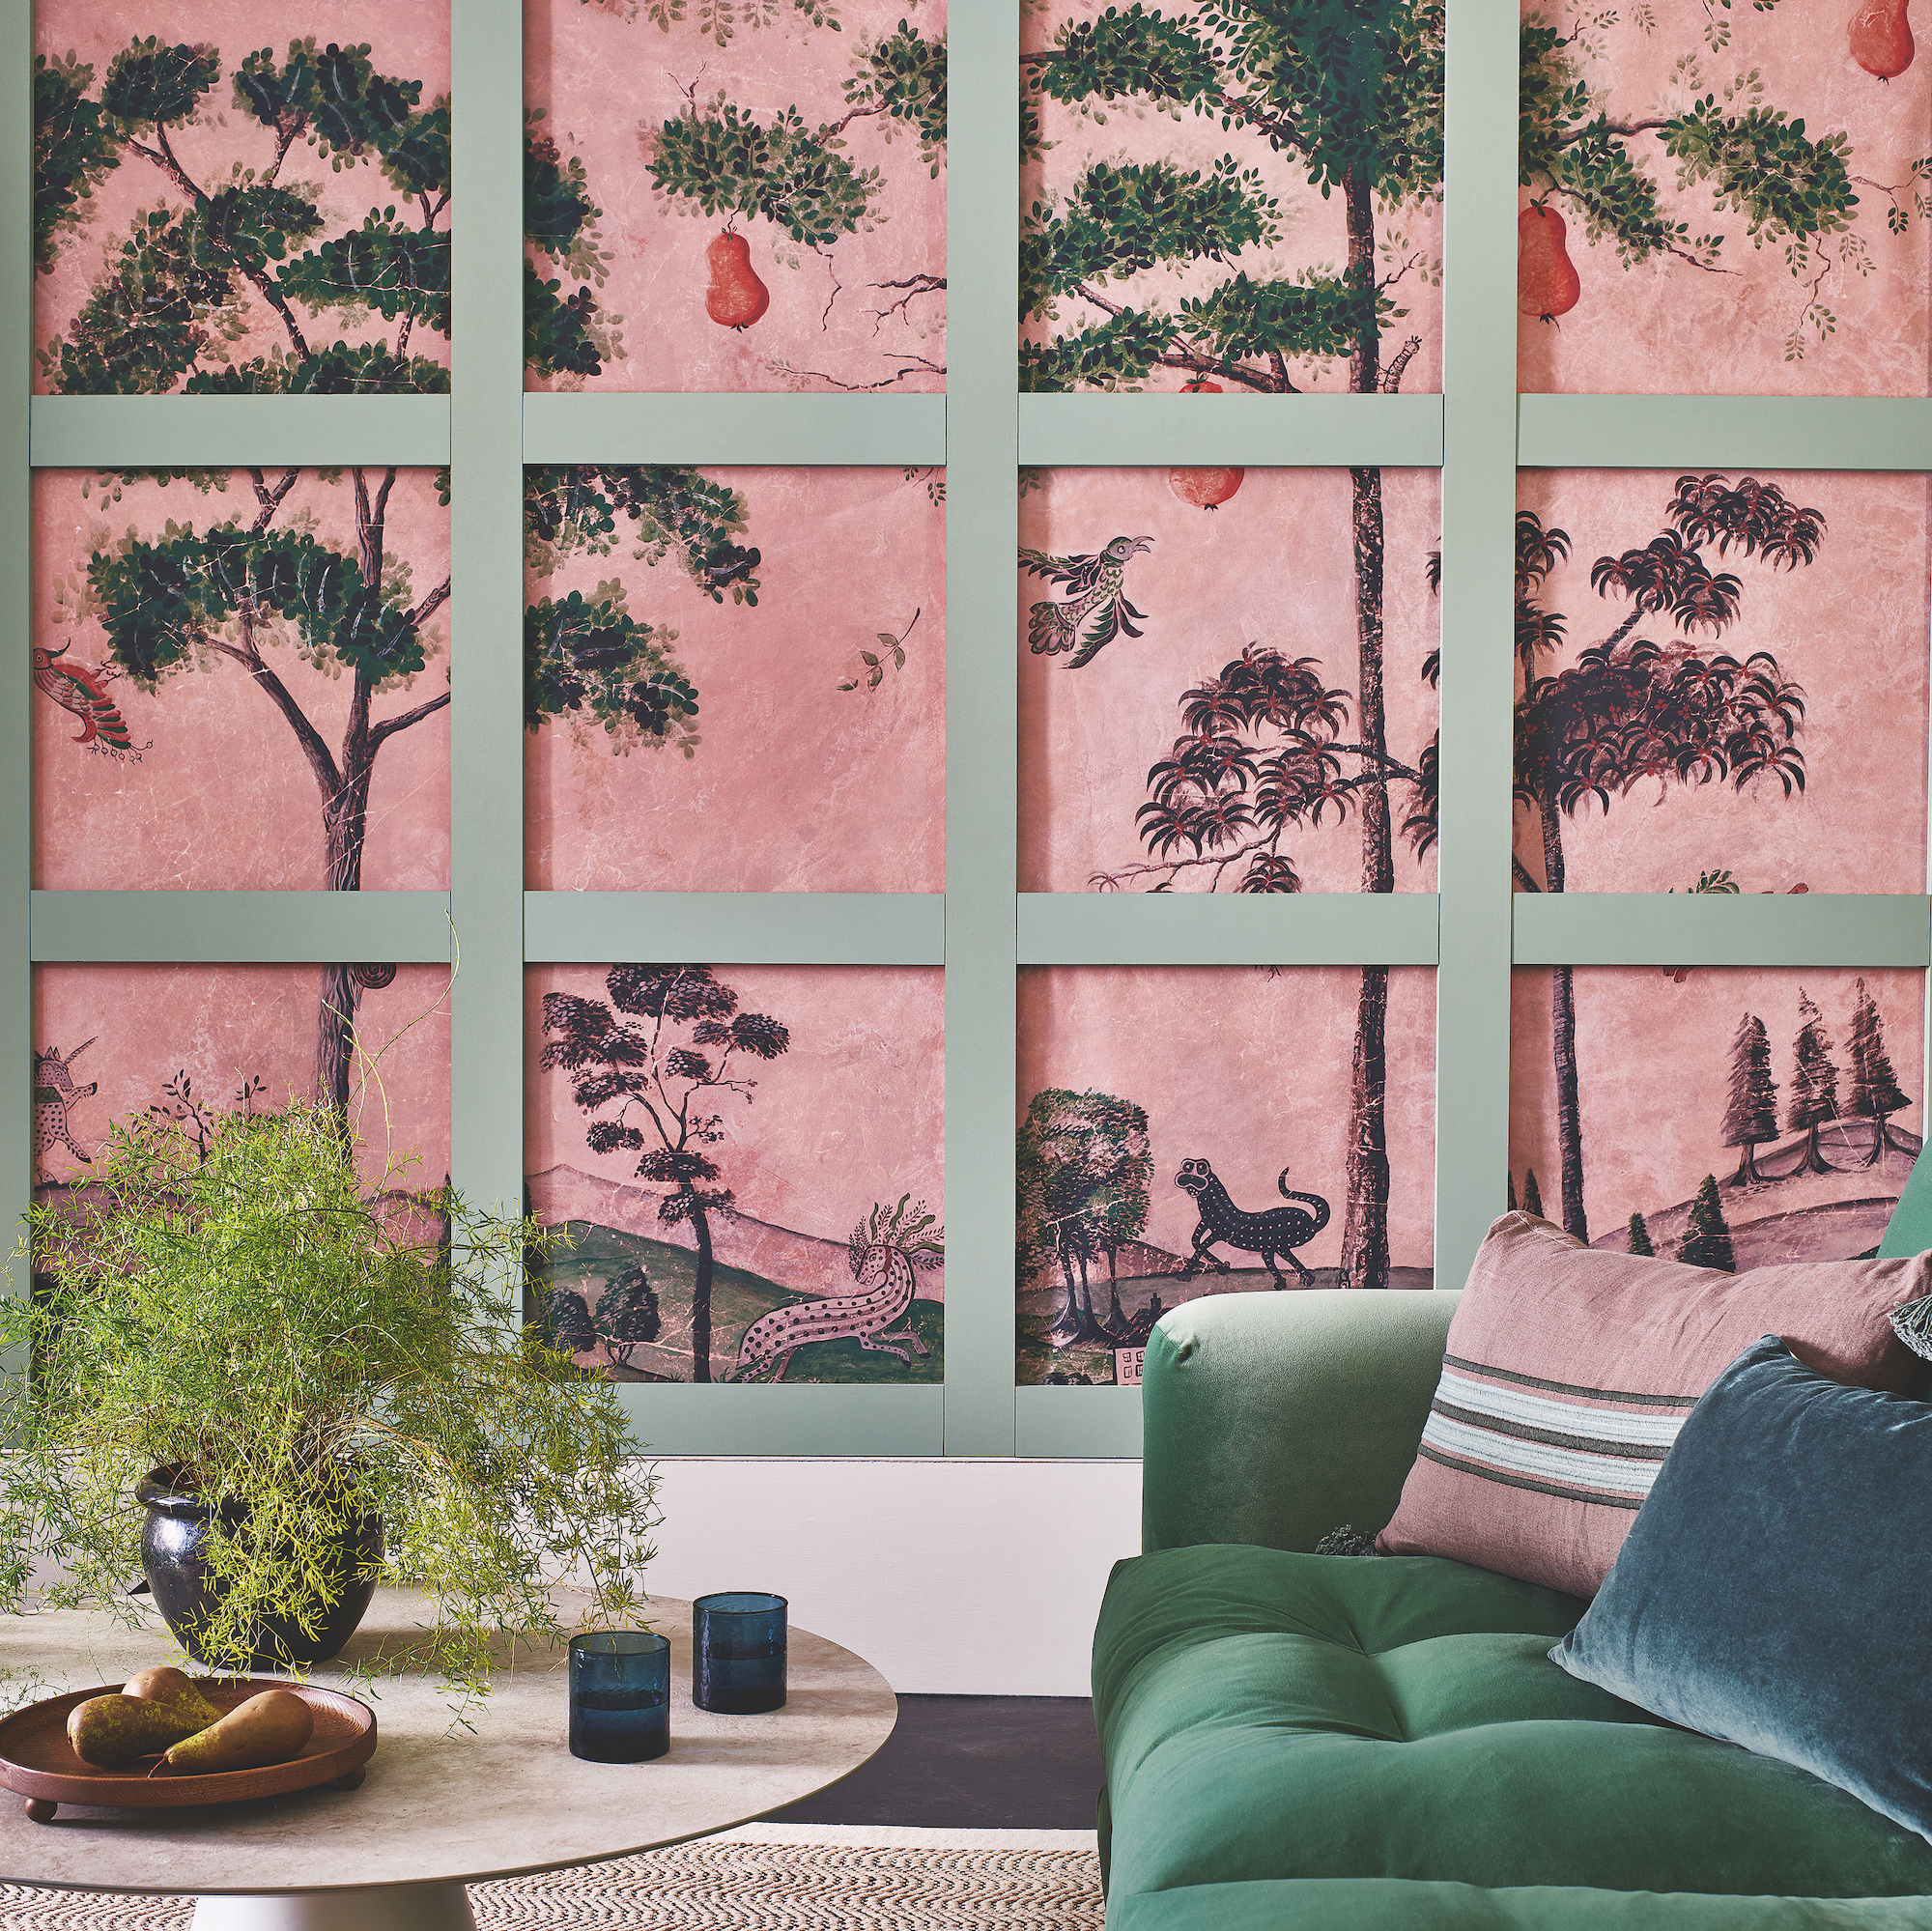 29 clever wallpaper ideas to inspire your next home update | Ideal Home